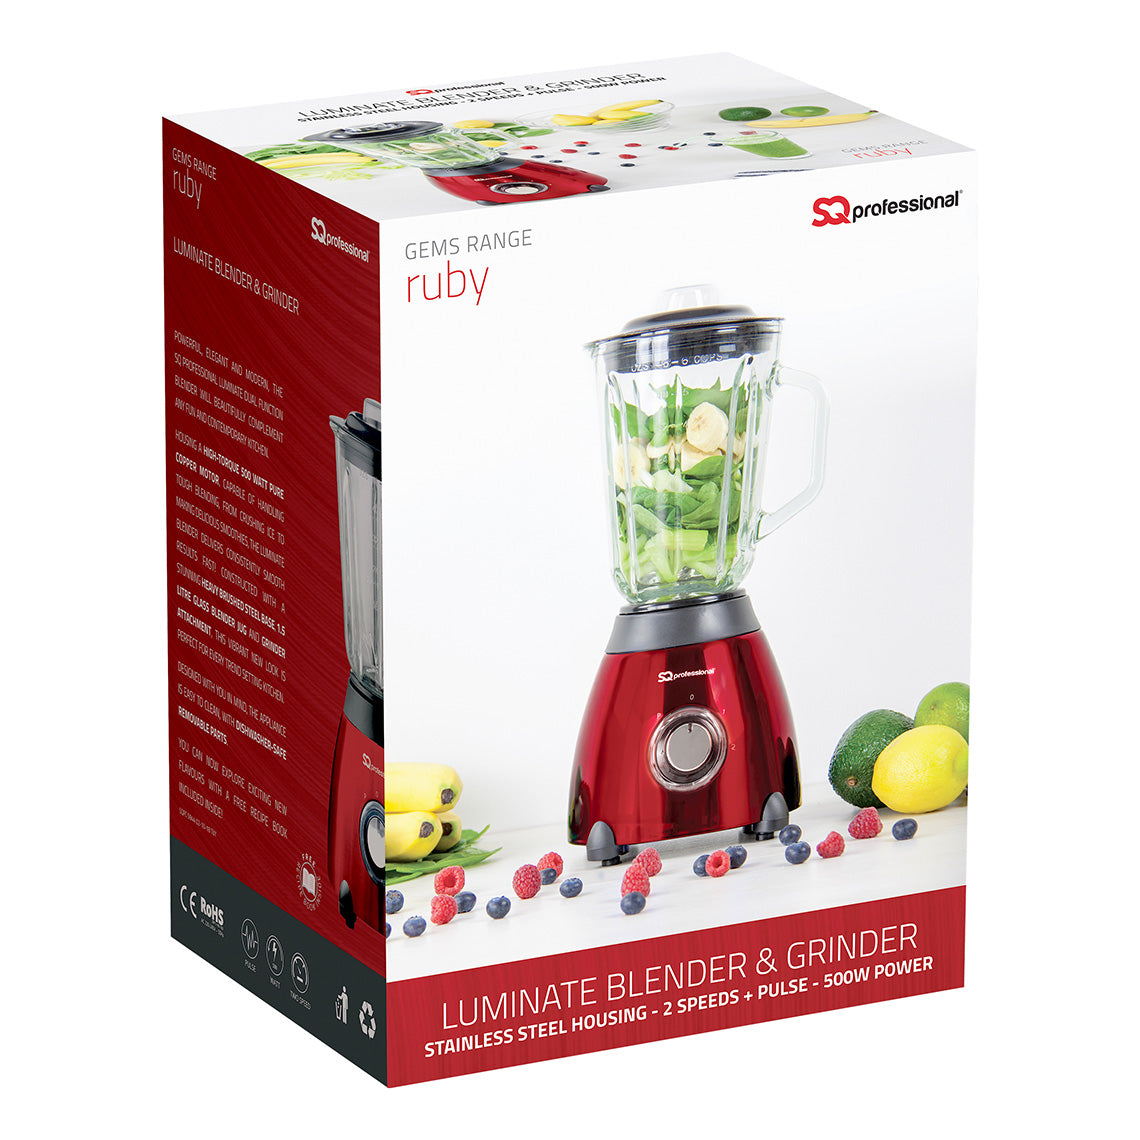 SQ Professional Luminate Blender and Grinder 500W Ruby 5944 / 2463 (Parcel Rate)